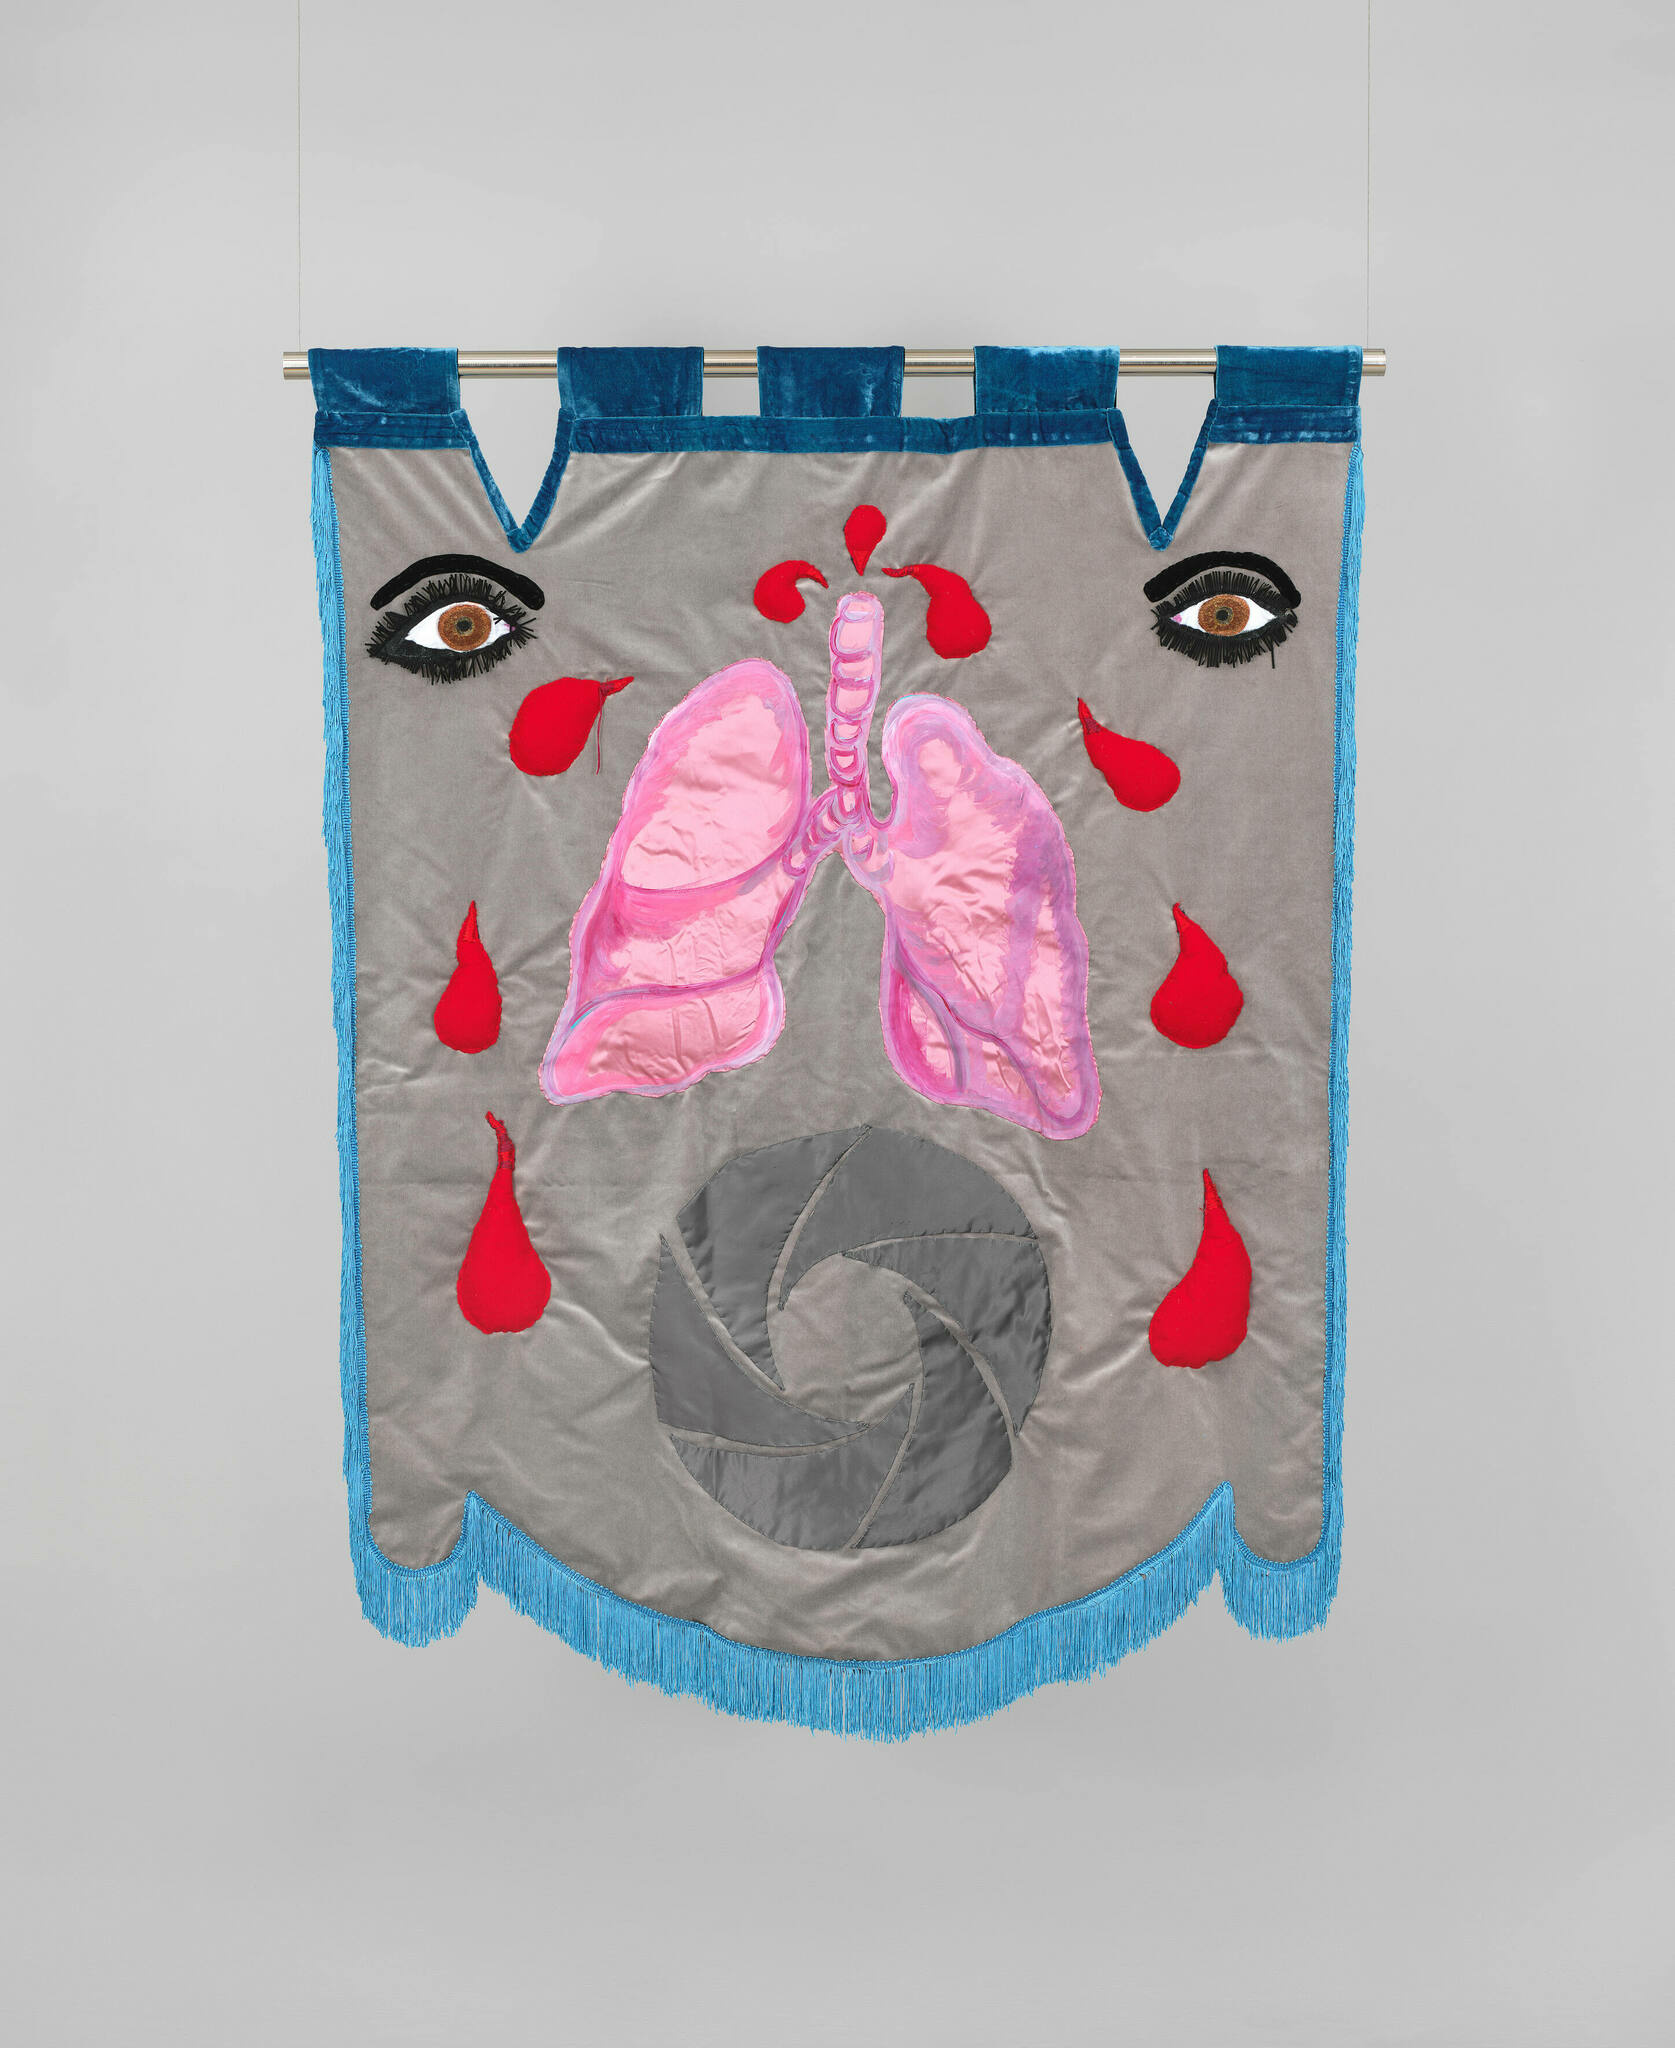 Lush fabric banner with eyelashed eyes framing pink lungs spurting blood droplets above geometric logo.